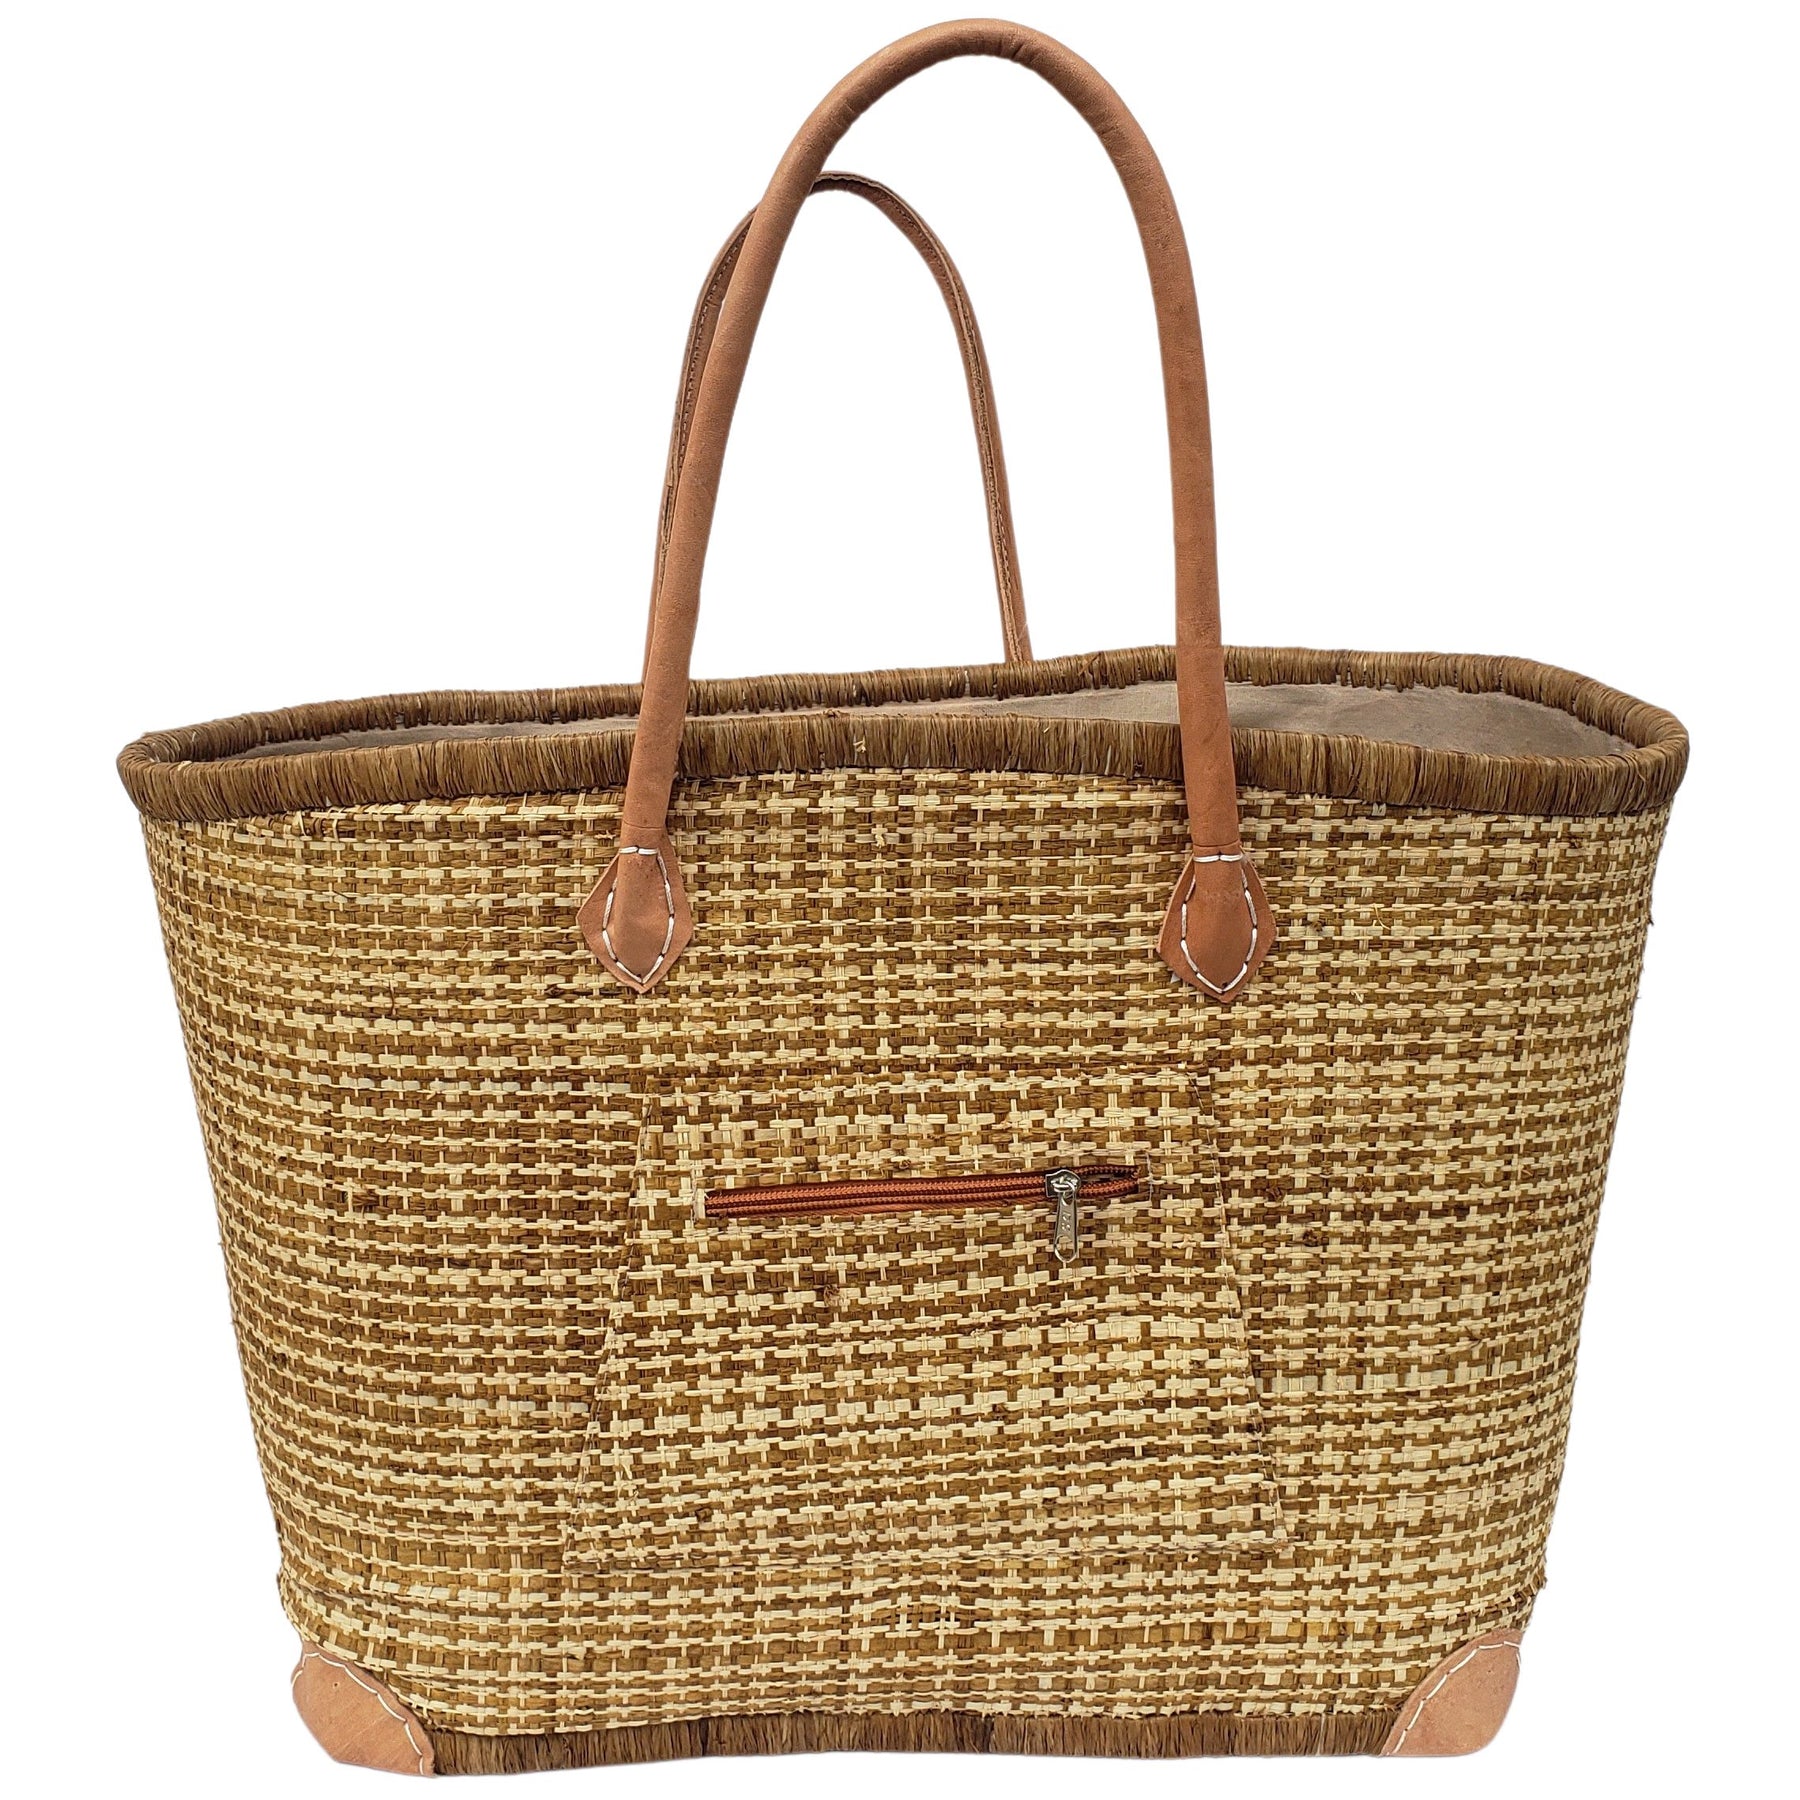 45 of 59: Adjanie: Authentic Madagascar Raffia and Leather Tote Bag (Natural and Brown)